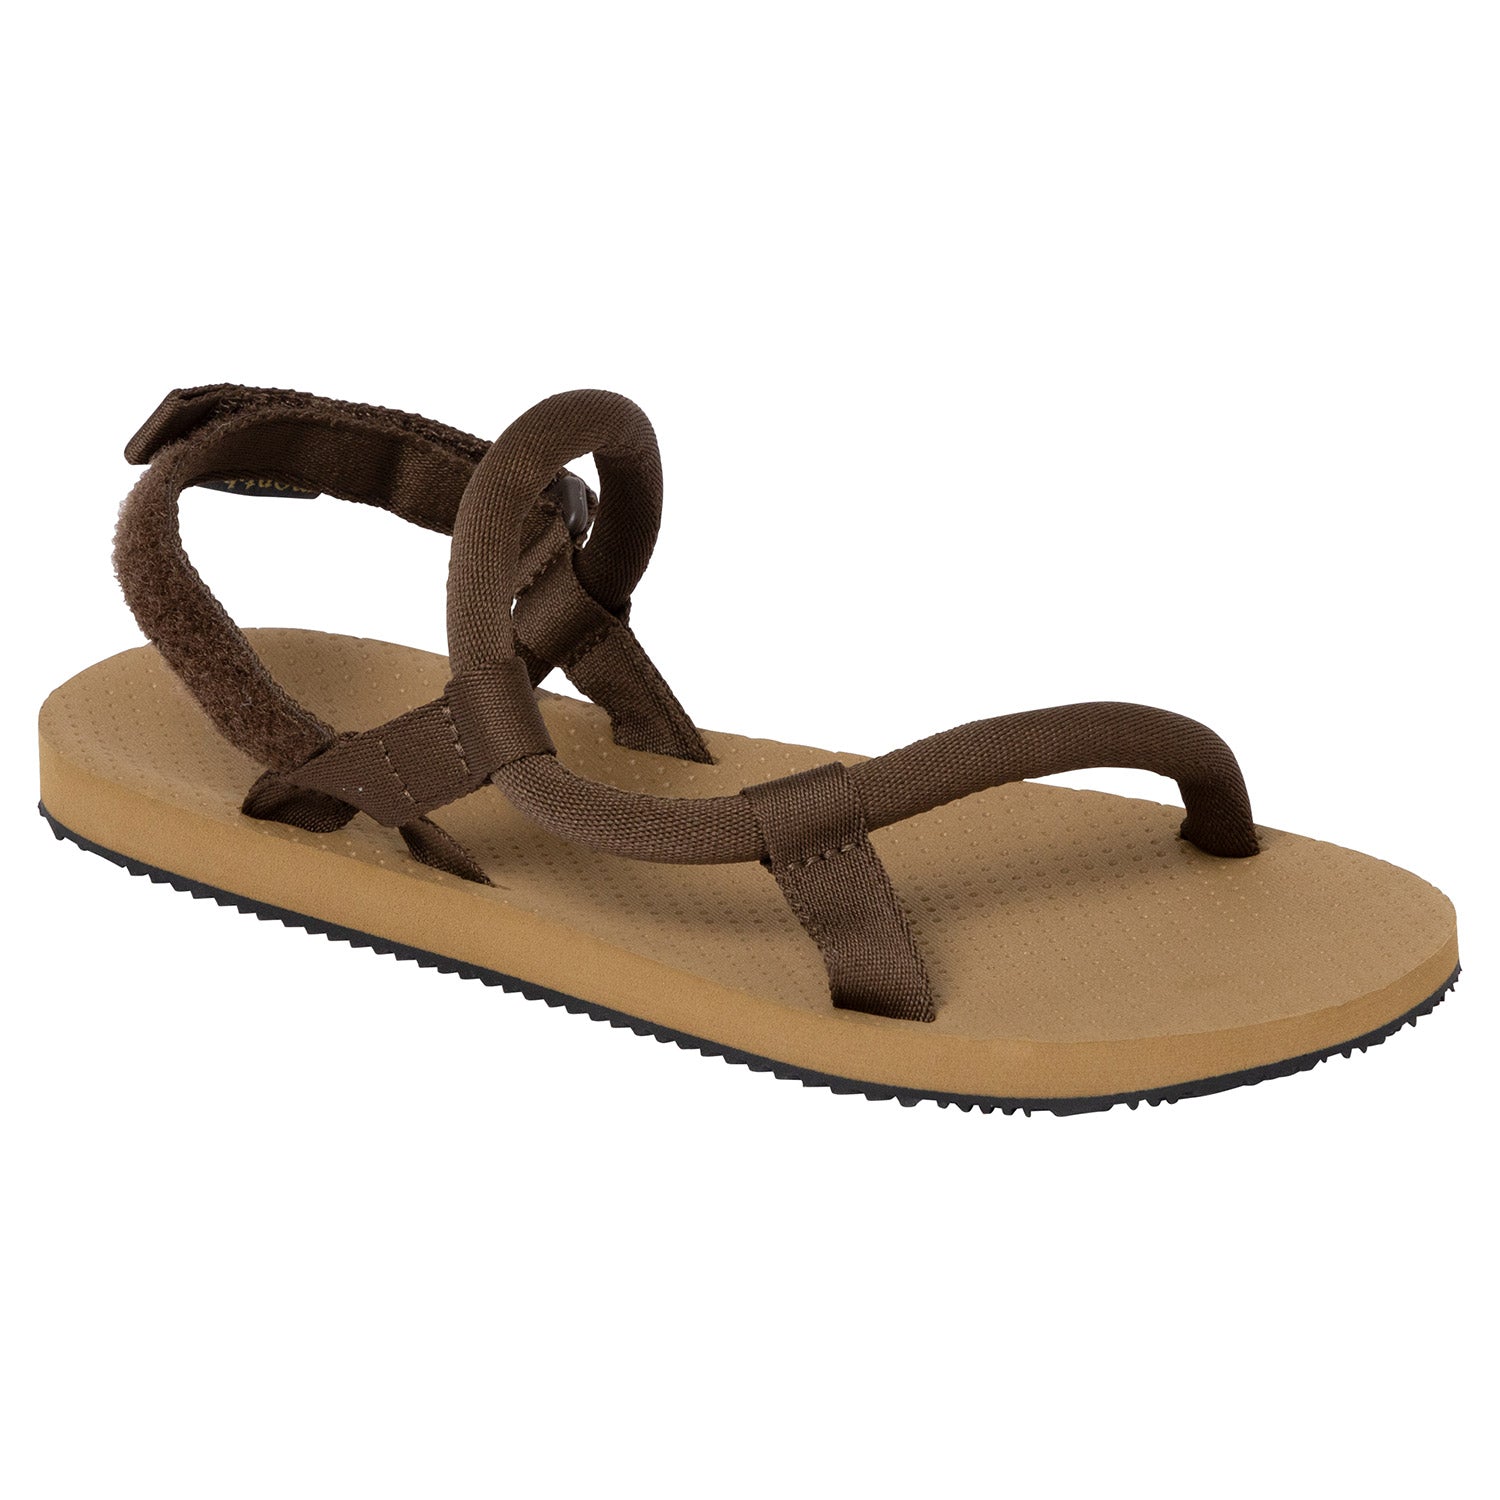 Montbell LOCK-ON SANDALS 涼拖鞋 棕 1129714BN